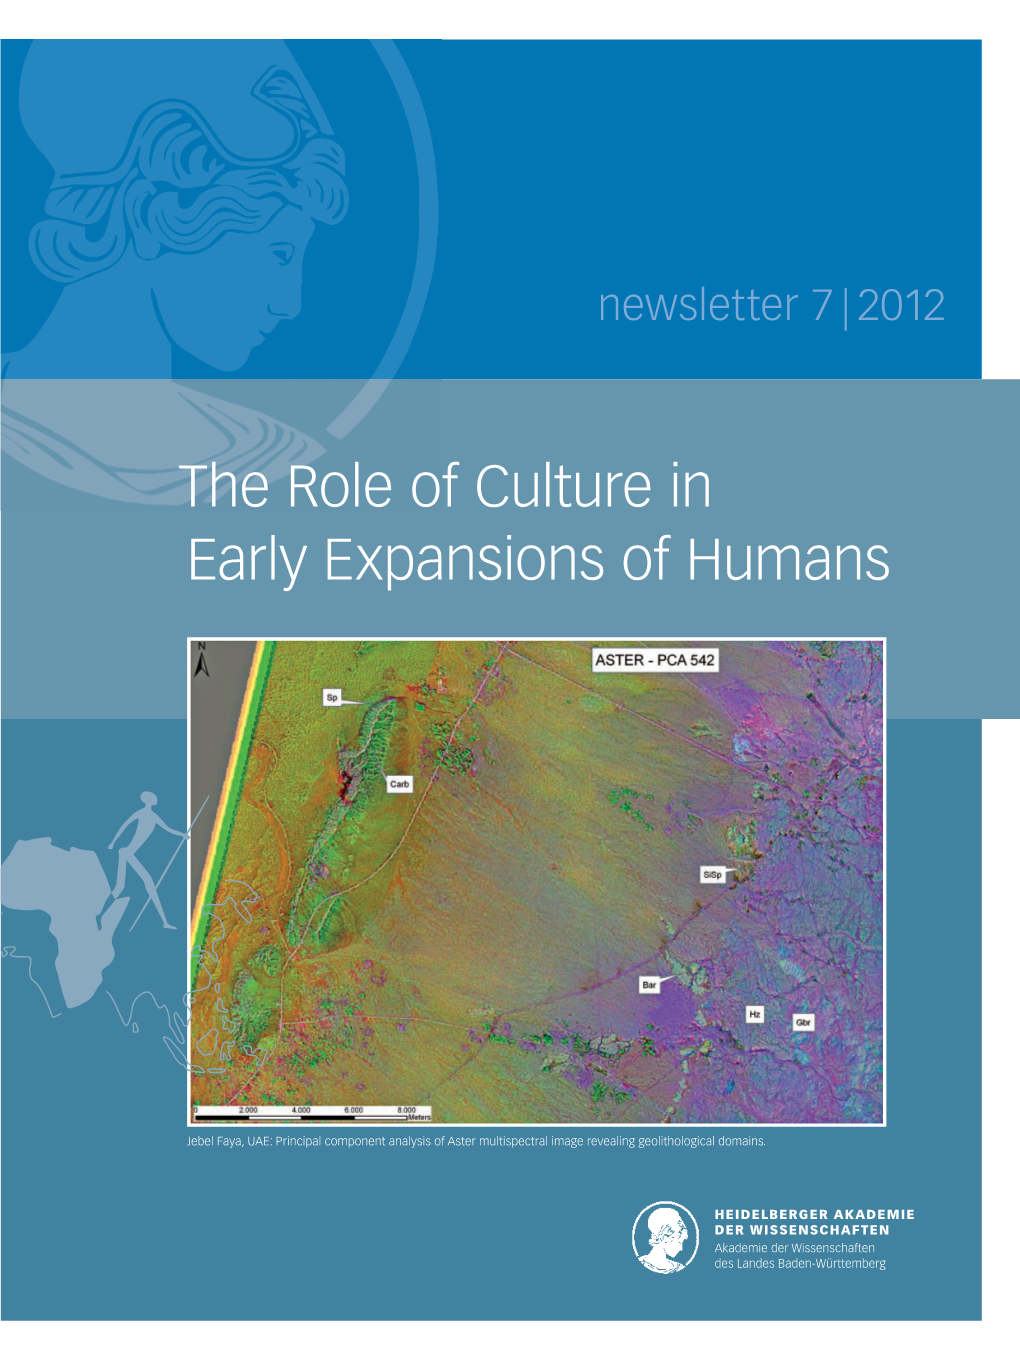 The Role of Culture in Early Expansions of Humans